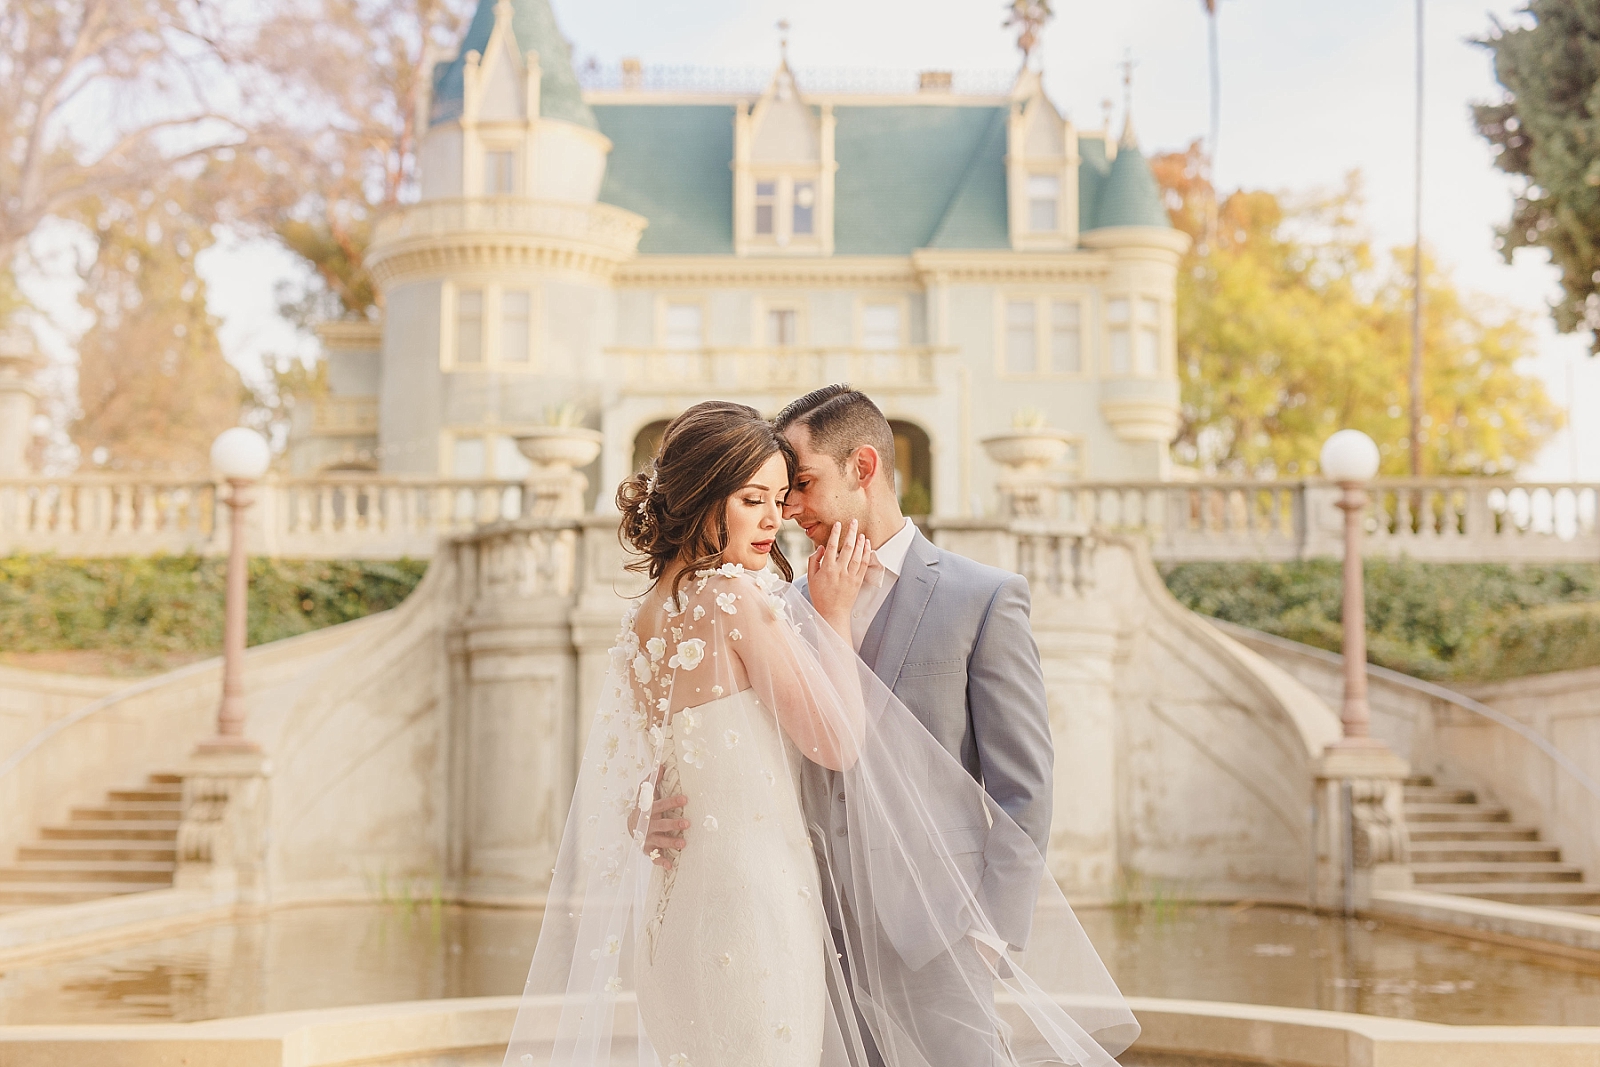 Romantic wedding photo of bride and groom in front of Kimberly Crest House in Redlands, CA